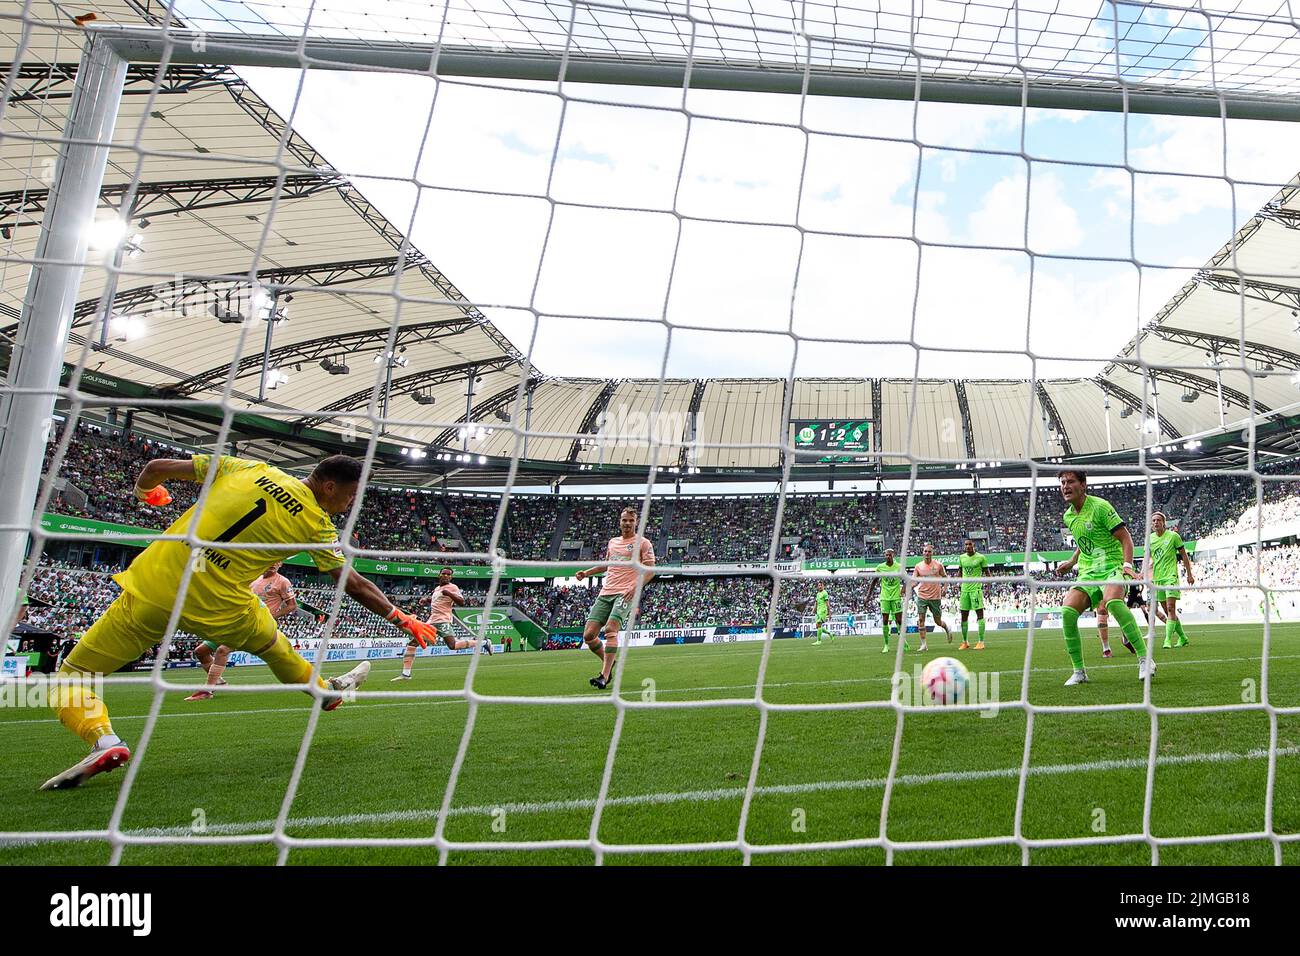 06 August 2022, Lower Saxony, Wolfsburg: Soccer, Bundesliga, VfL Wolfsburg - SV Werder Bremen, Matchday 1, Volkswagen Arena. Bremen goalkeeper Jiri Pavlenka (l) can't prevent the goal to make it 2:2. Photo: Swen Pförtner/dpa - IMPORTANT NOTE: In accordance with the requirements of the DFL Deutsche Fußball Liga and the DFB Deutscher Fußball-Bund, it is prohibited to use or have used photographs taken in the stadium and/or of the match in the form of sequence pictures and/or video-like photo series. Stock Photo